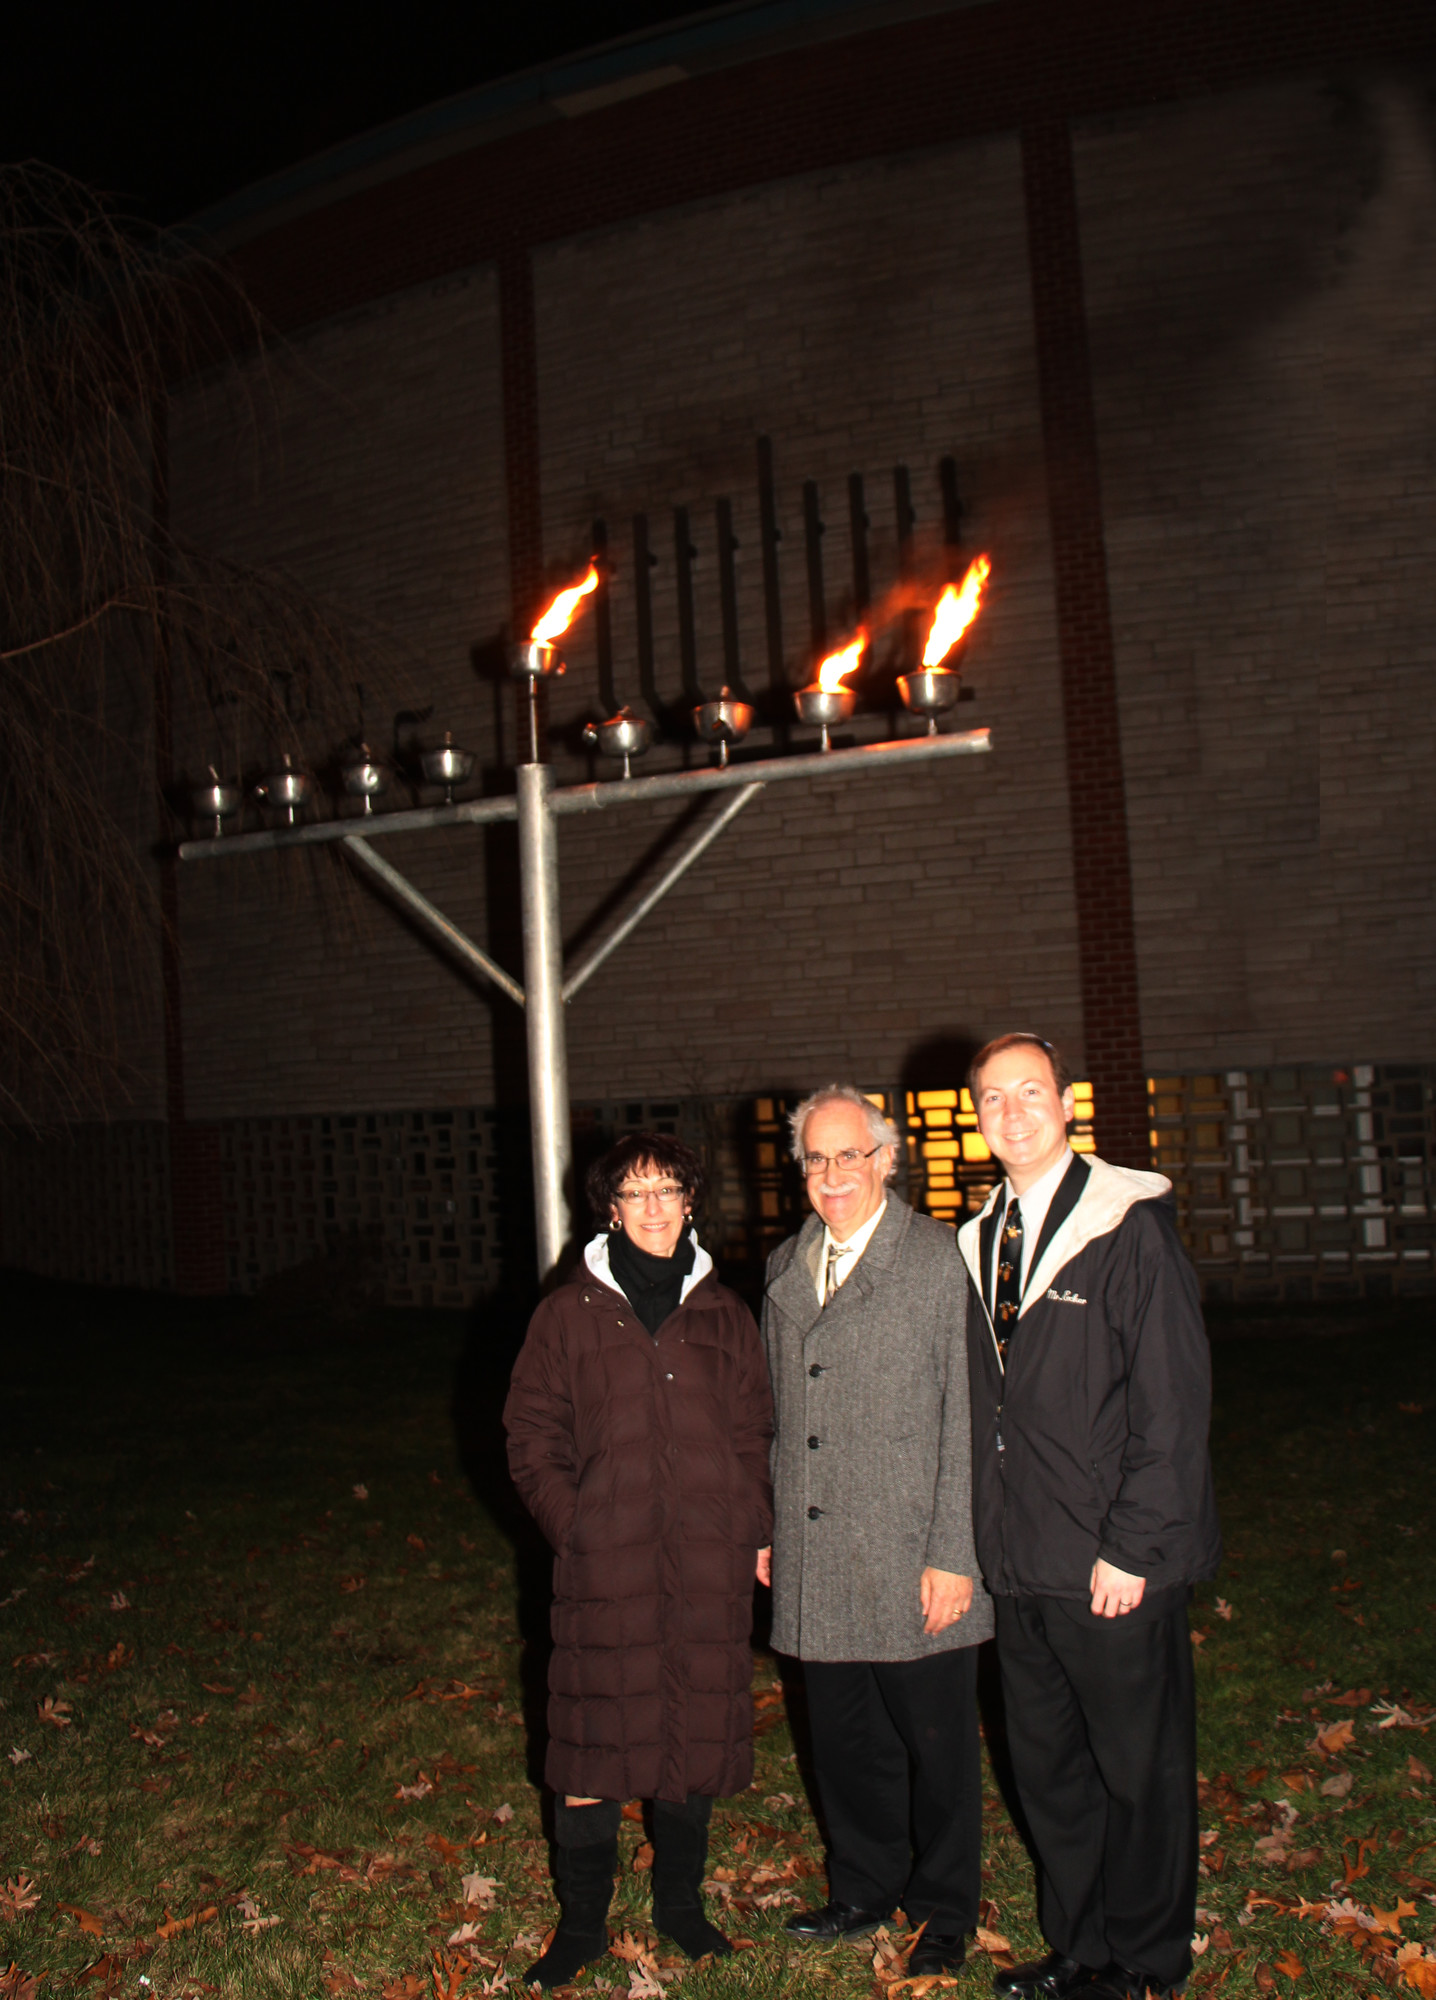 The East Meadow Jewish Center will host menorah lightings throughout Hanukkah. Hebrew School Principal Shira Ornstein, Dr. Ronald Androphy, the temple’s rabbi, and Eckers led the Dec. 7 ceremony.